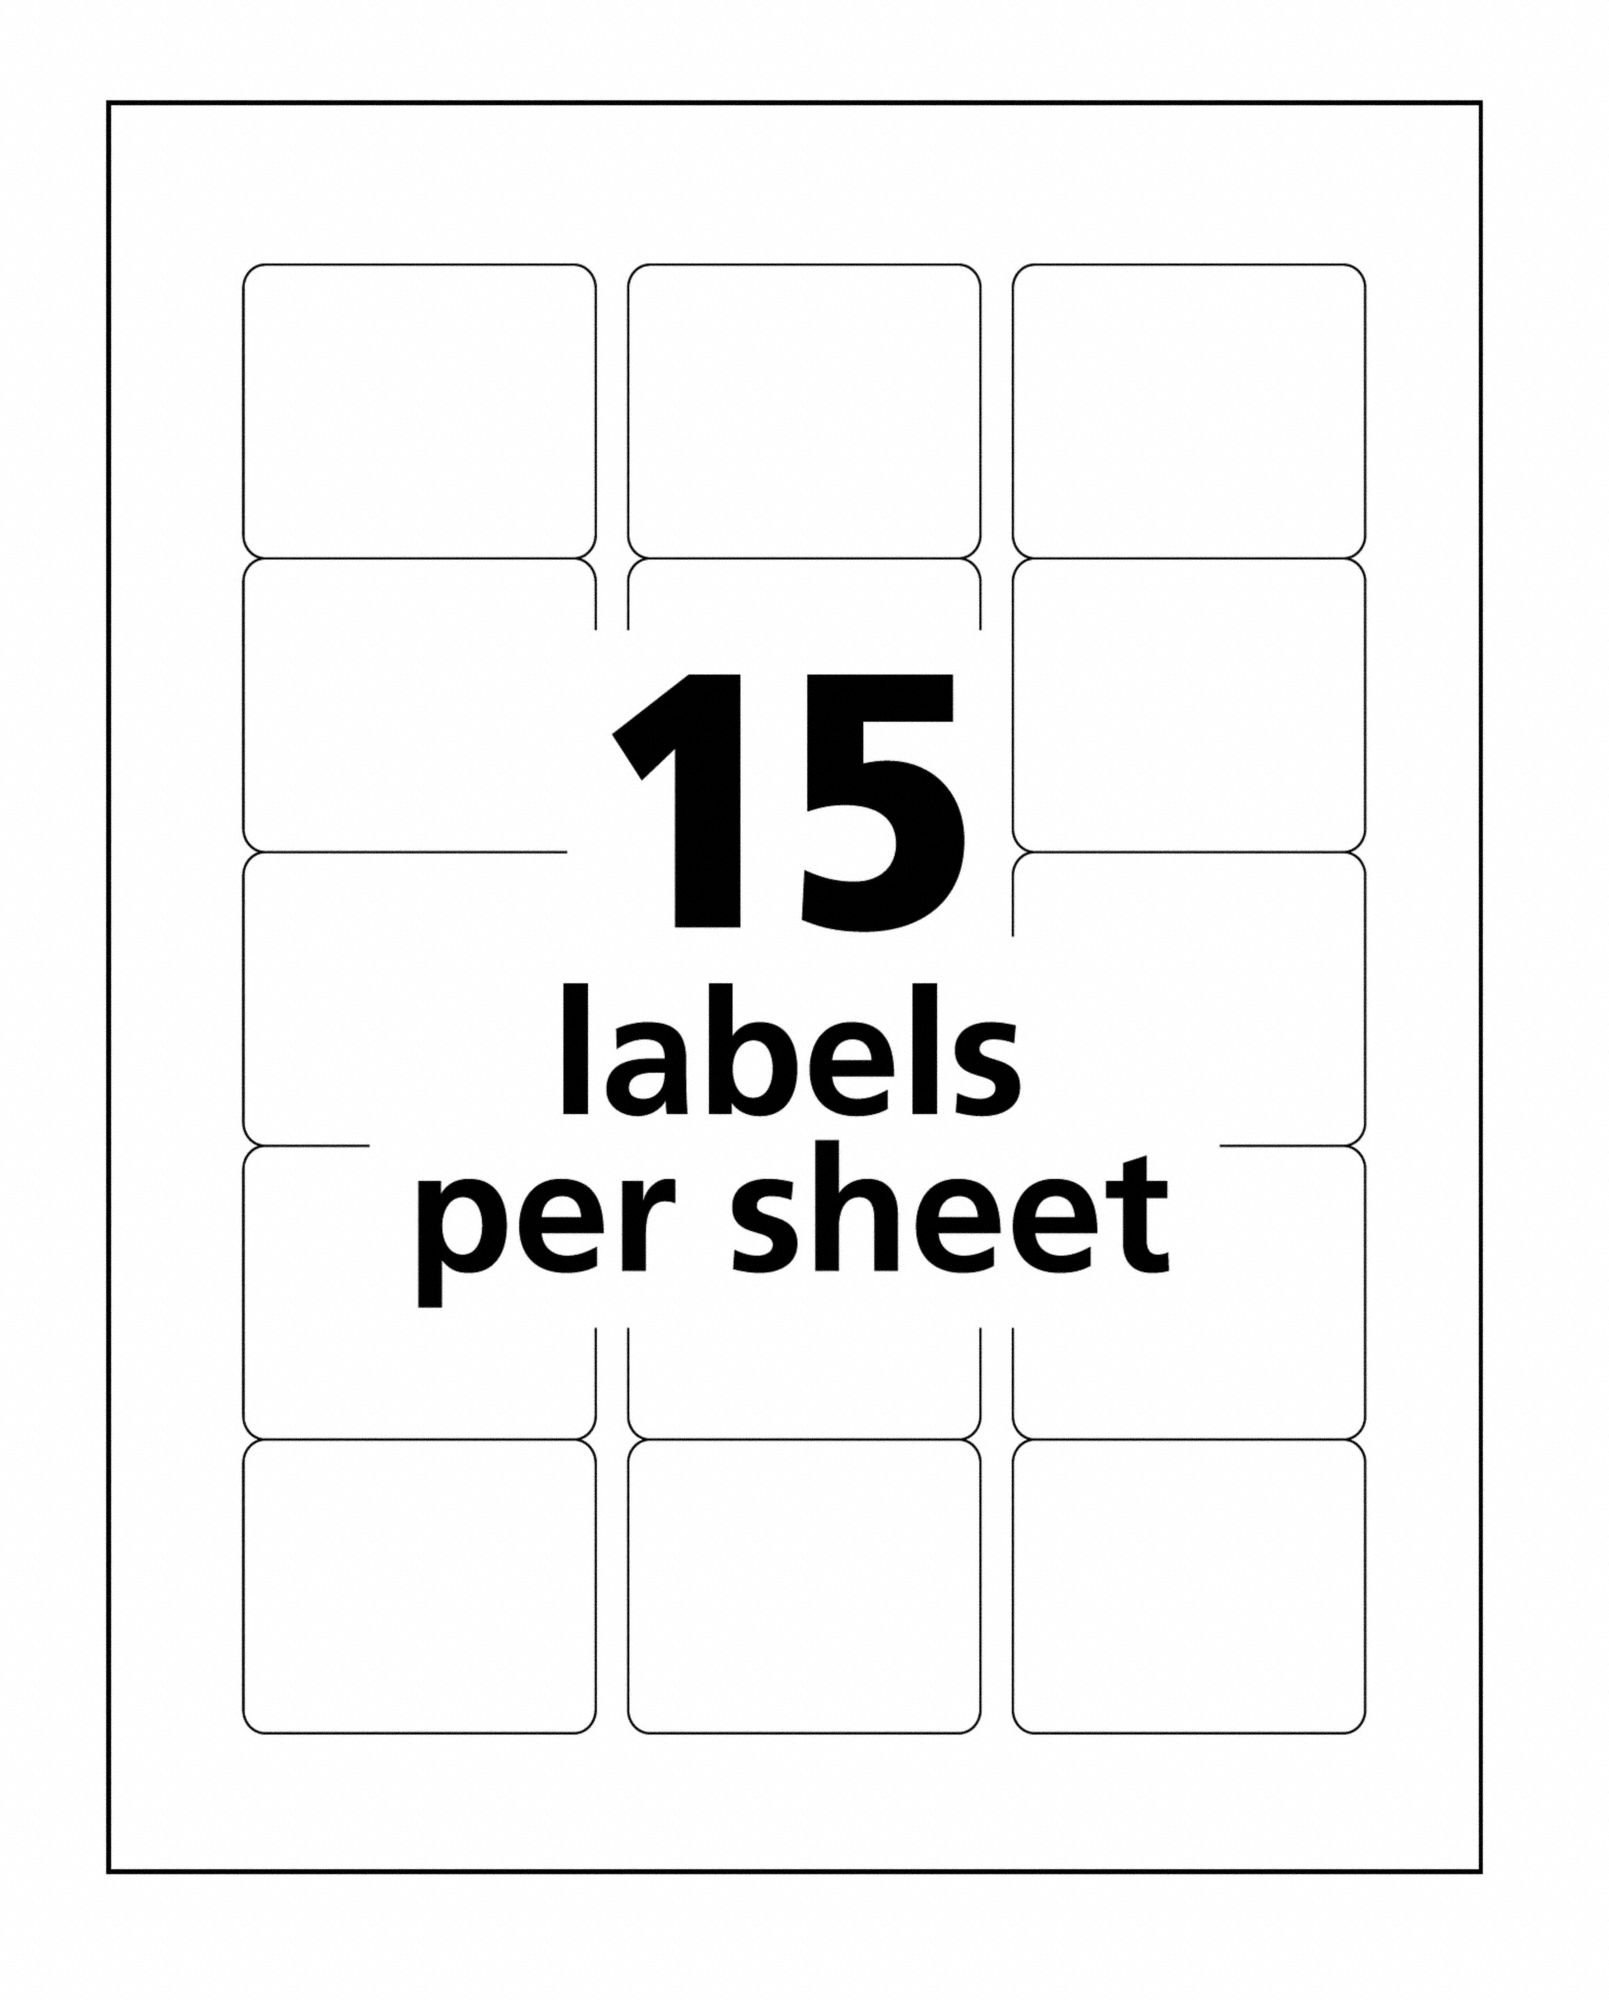 avery-laser-label-6-578-avery-template-white-2-in-label-ht-2-5-8